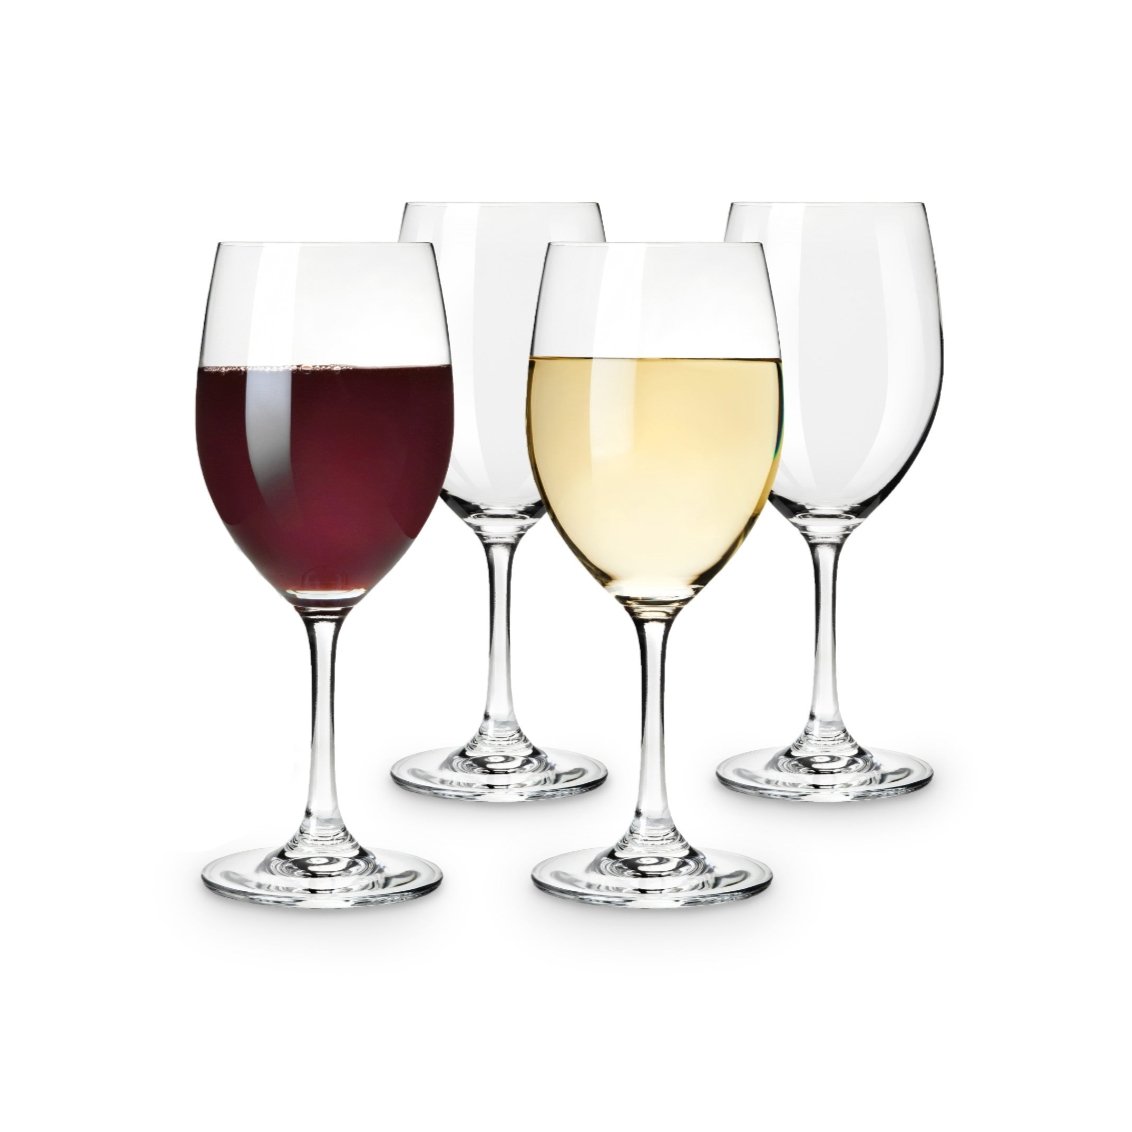 https://cdn.shopify.com/s/files/1/0275/1876/3088/products/red-and-white-tasting-glasses-set-of-4-484156_1445x.jpg?v=1666389203